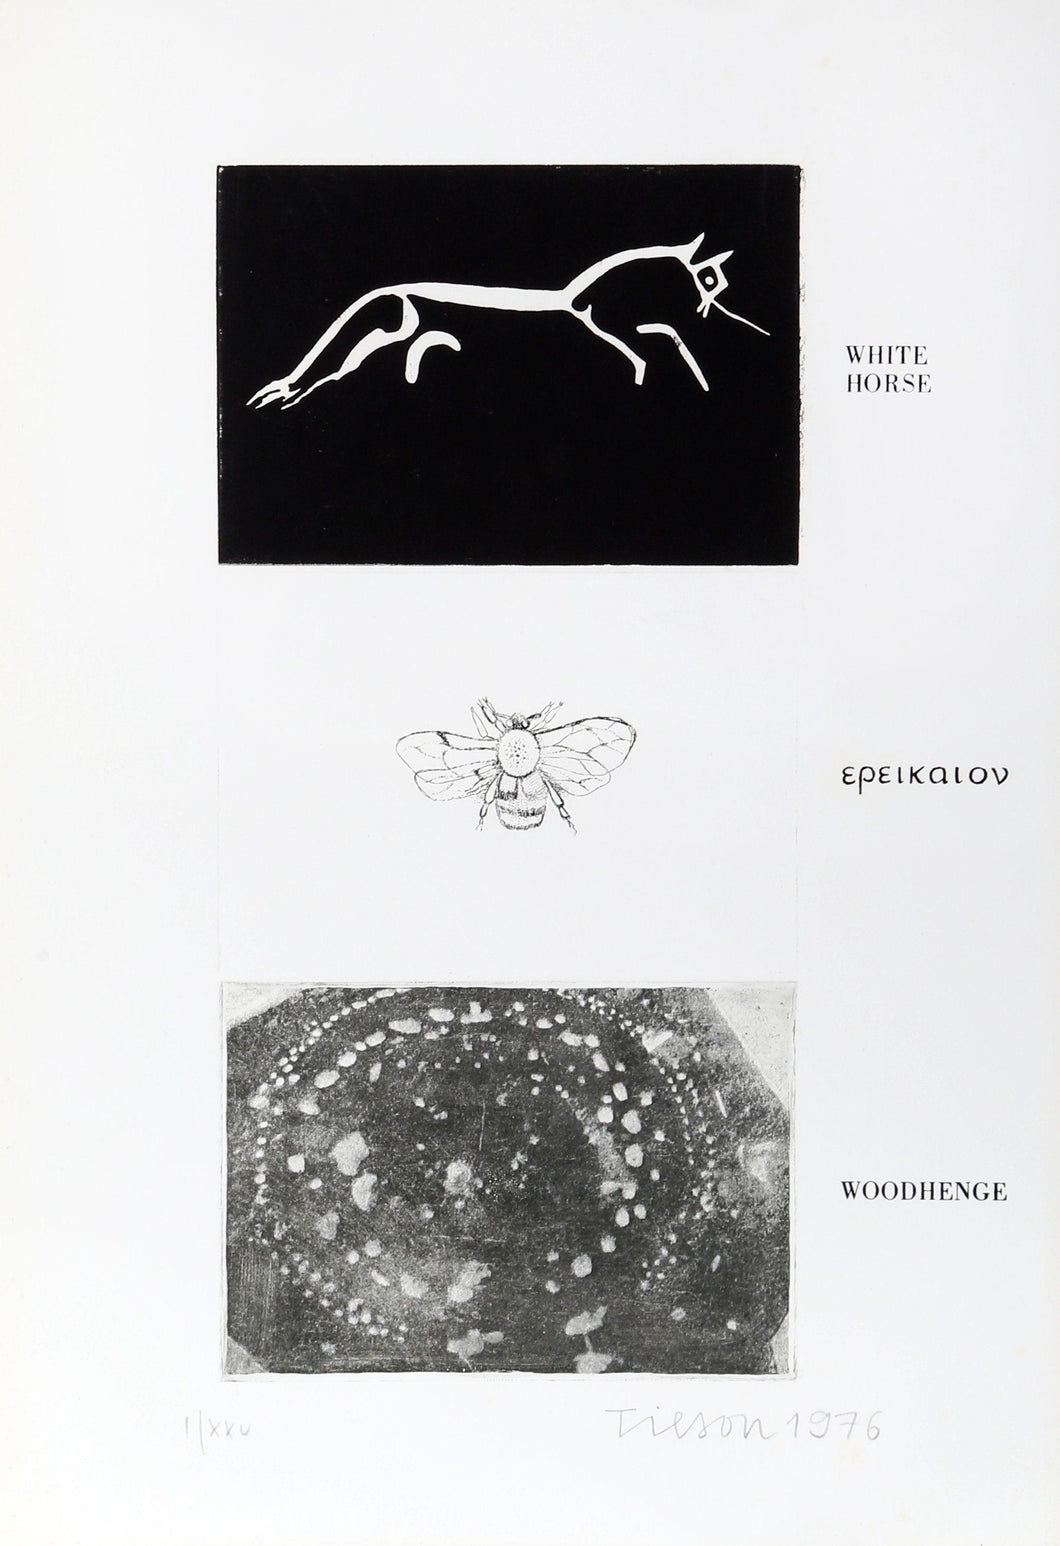 White Horse from Wessex Etching | Joe Tilson,{{product.type}}